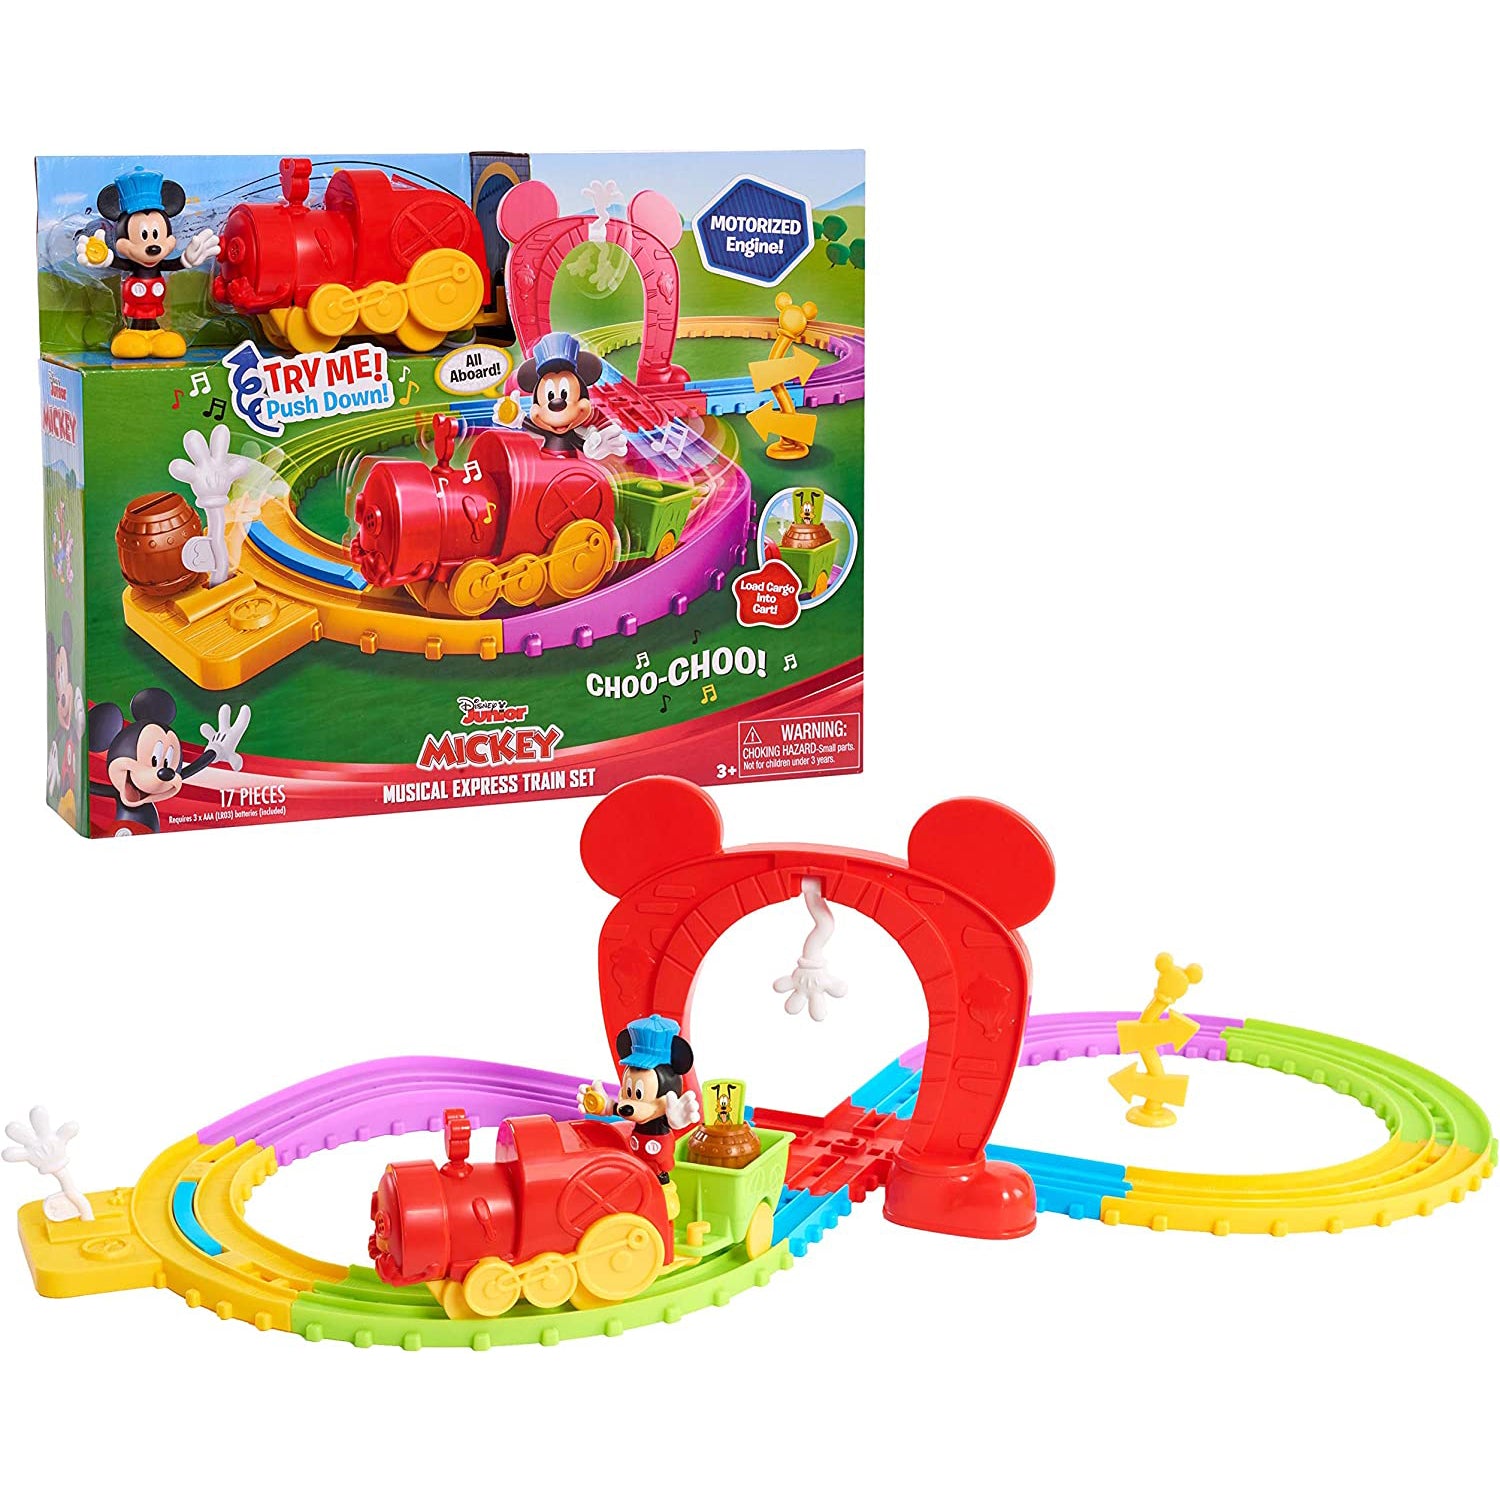 Disney’s Mickey Mouse Mickey’s Musical Express Train Set